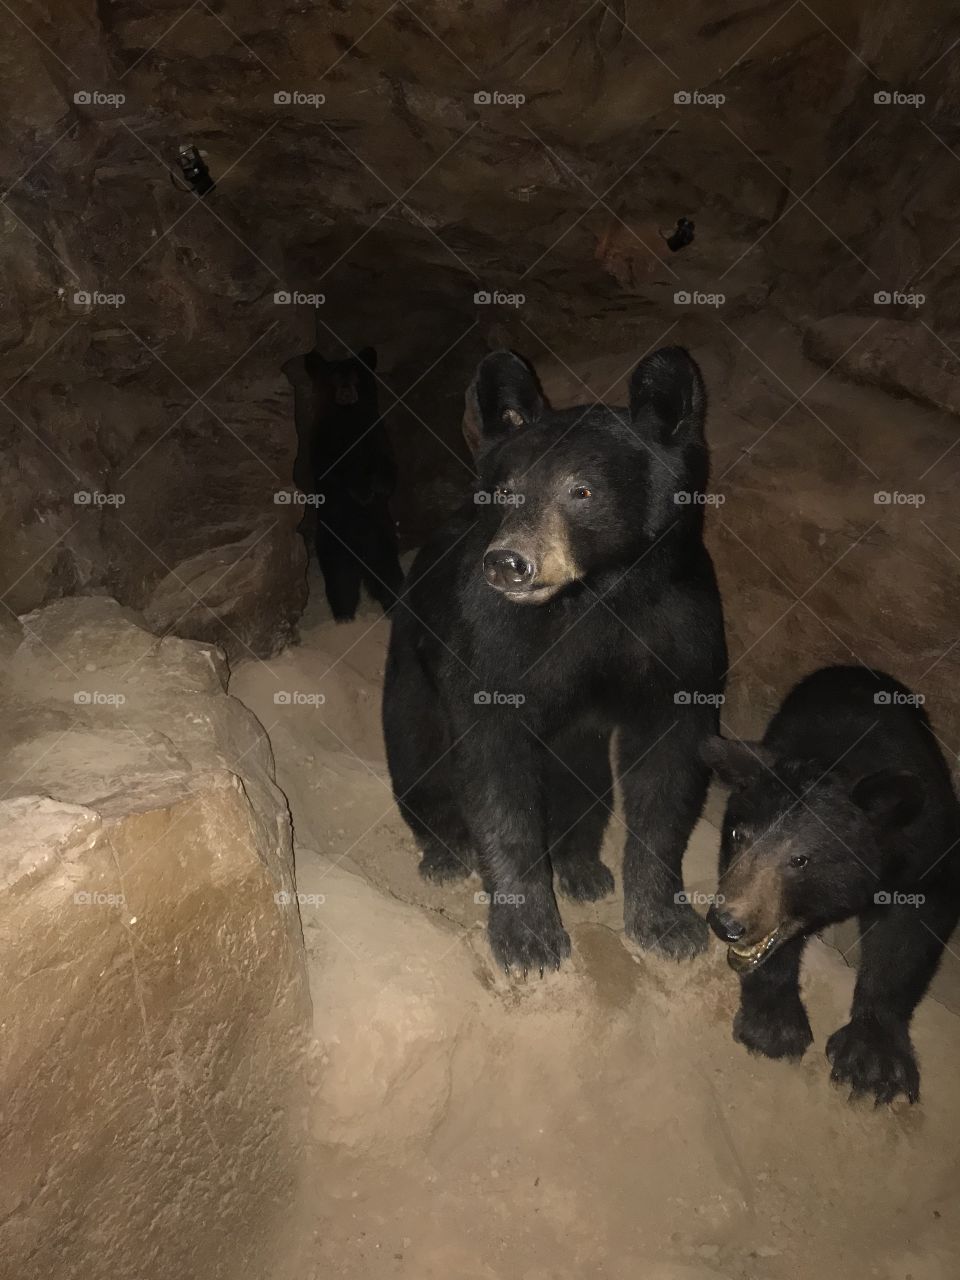 Mama bear and her two cubs. One doesn’t seem too happy! But very beautiful and extremely photogenic.